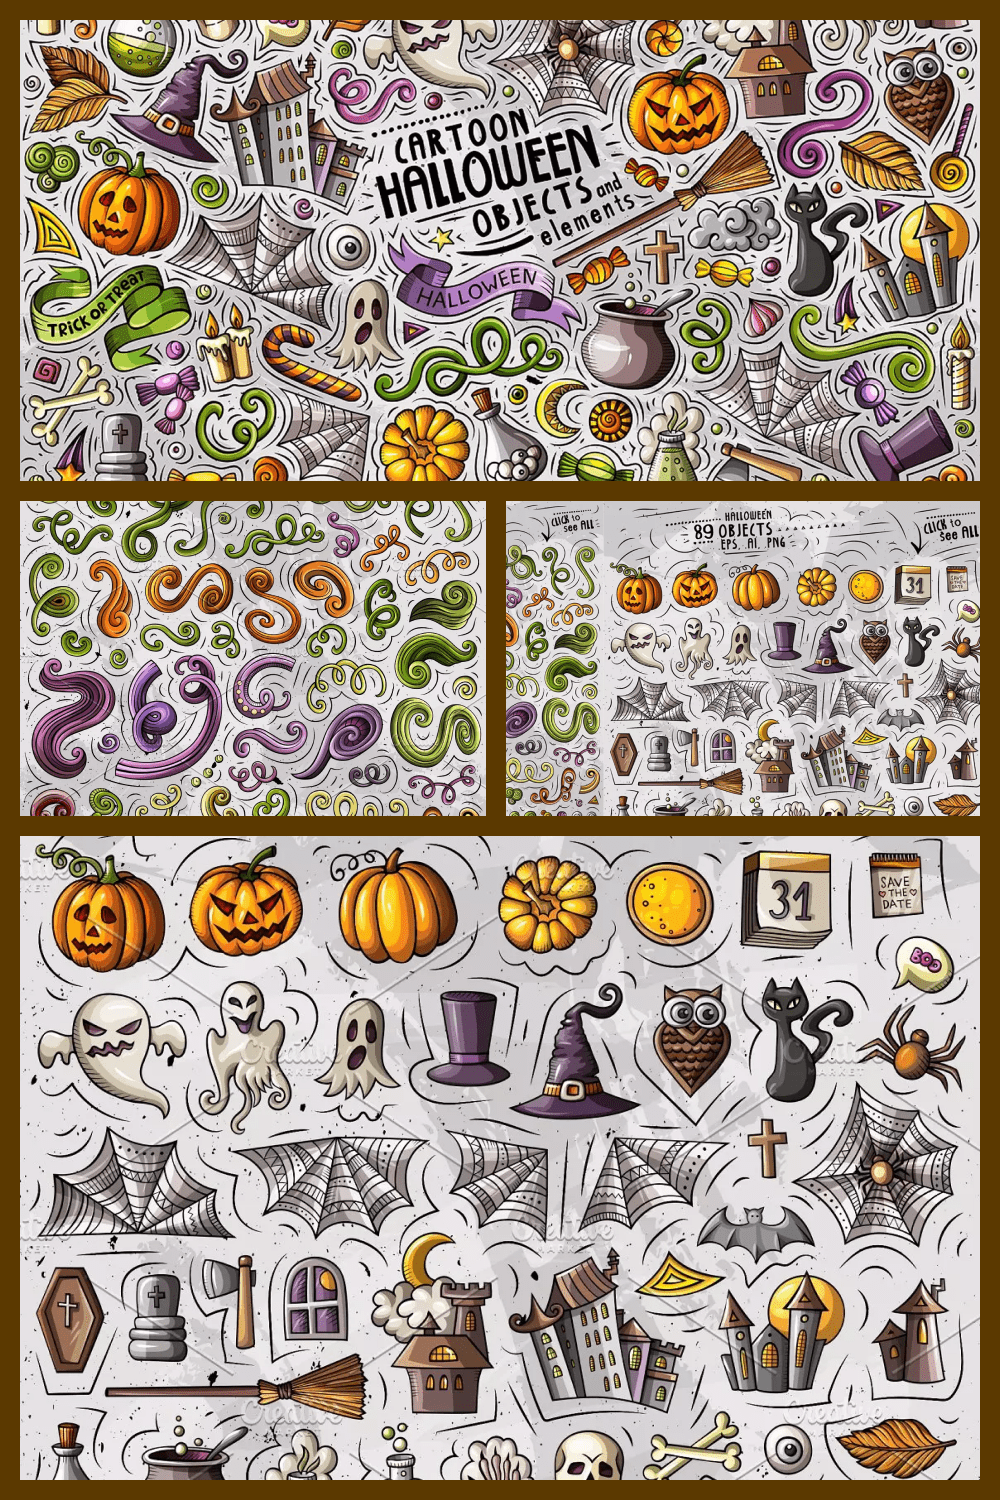 Collage of small hand-drawn images on the theme of Halloween.